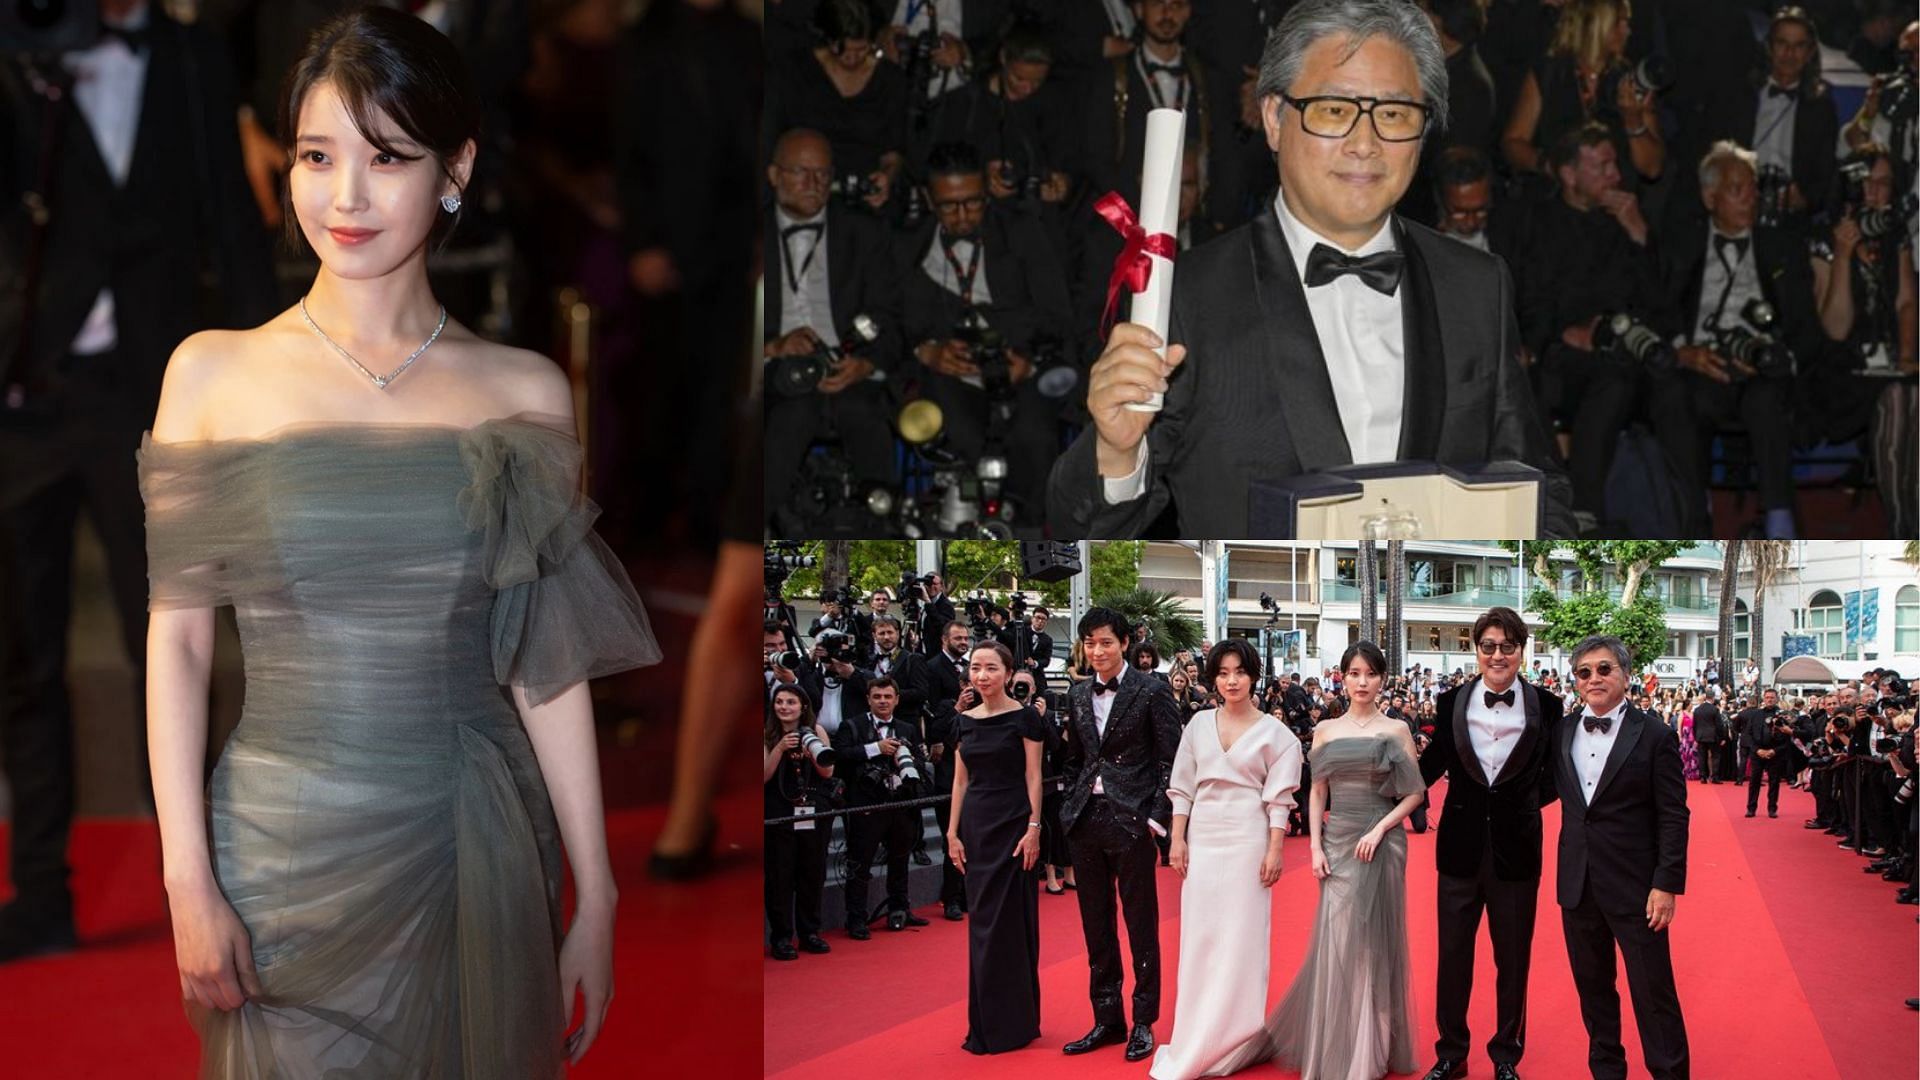 IU, Park Chan-wook, and Broker&#039;s crew at Cannes 2022 (Image via Getty Images, Yonhap)